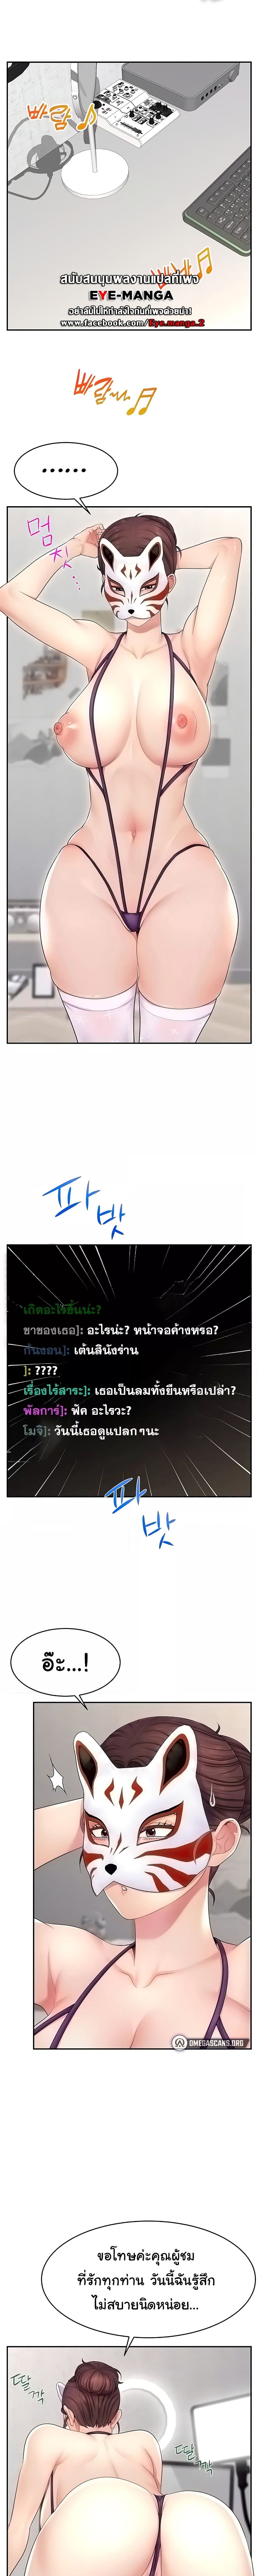 Making Friends With Streamers by Hacking! ตอนที่ 13 ภาพ 0